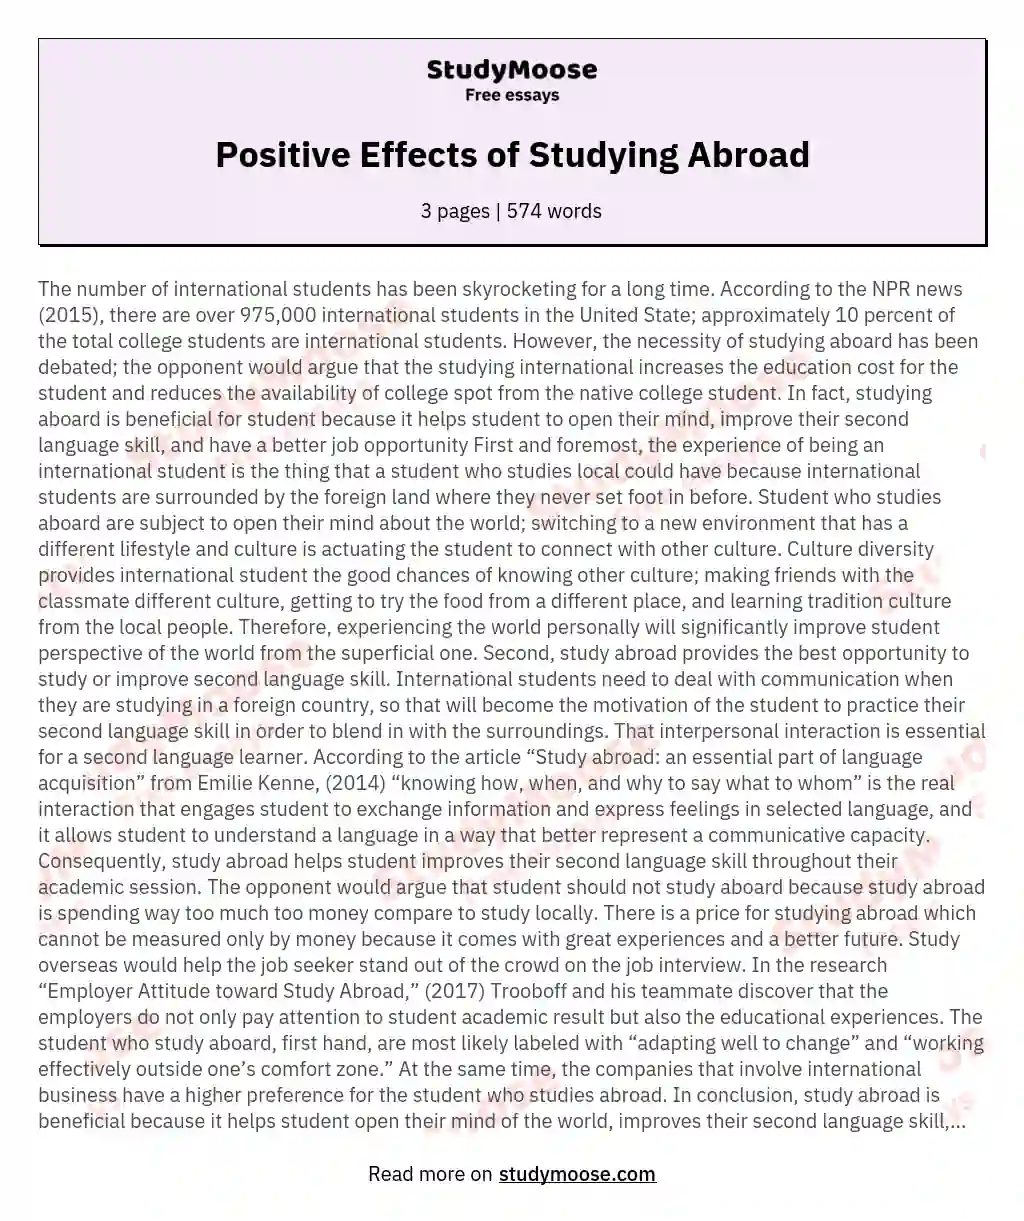 Positive Effects of Studying Abroad essay